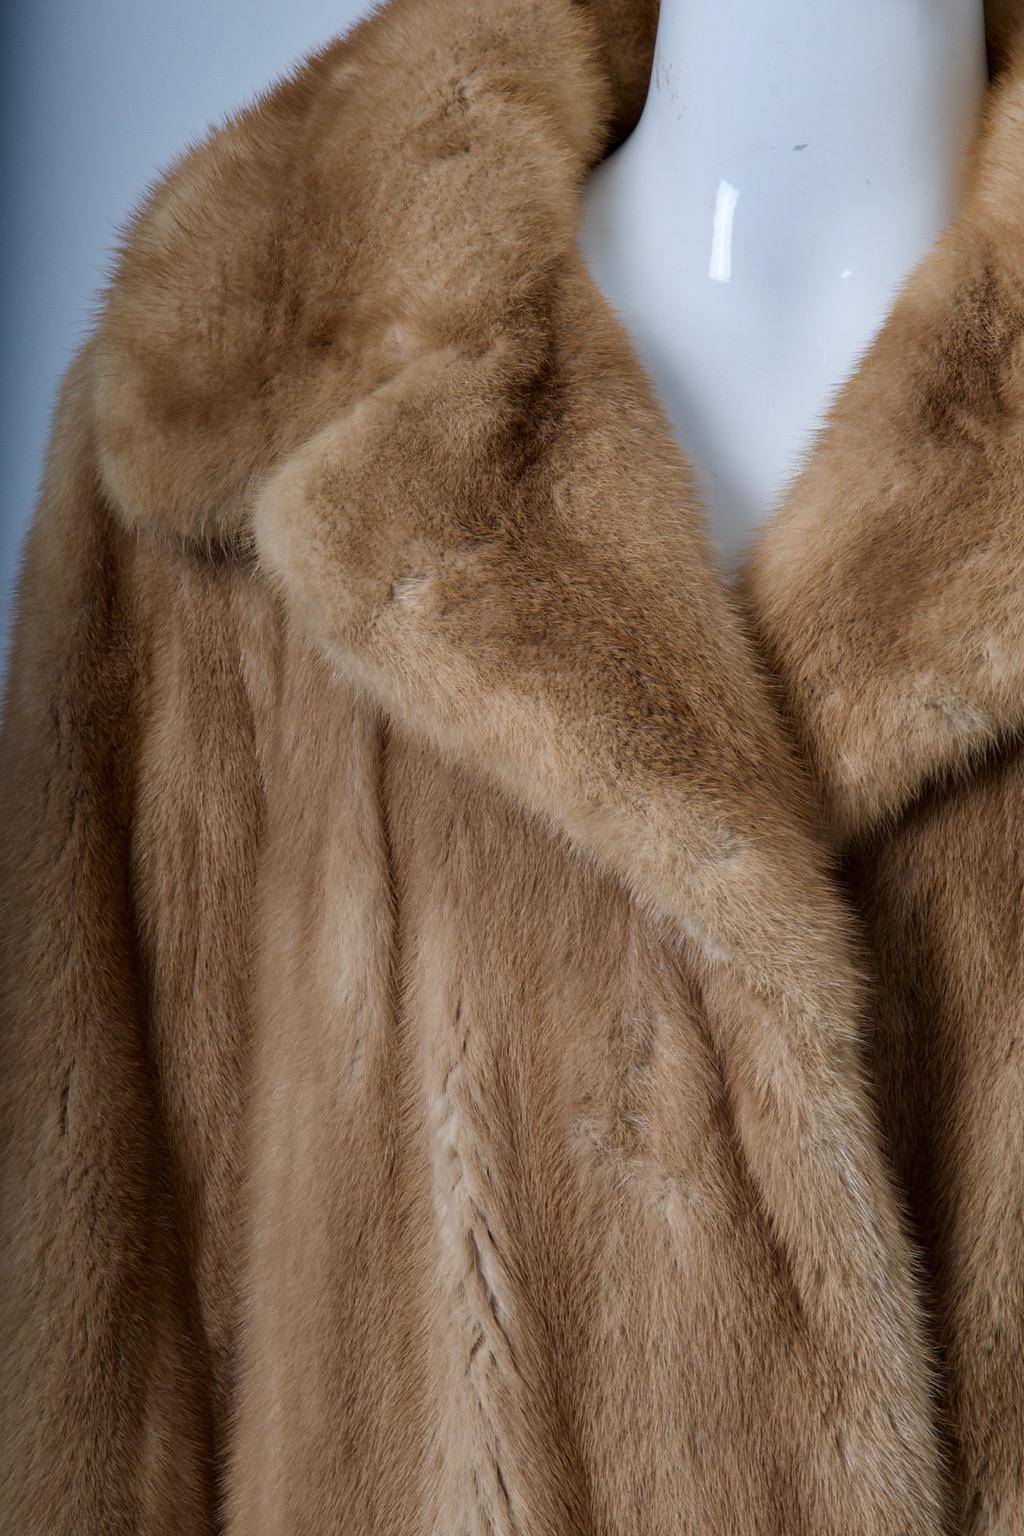 c. 1970 mink jacket in a soft golden shade features a spread collar and comes with a brown leather sash belt. One fur hook and an interior tie keep allow the jacket to be worn with or without the belt. Add your own belt for a unique look. The